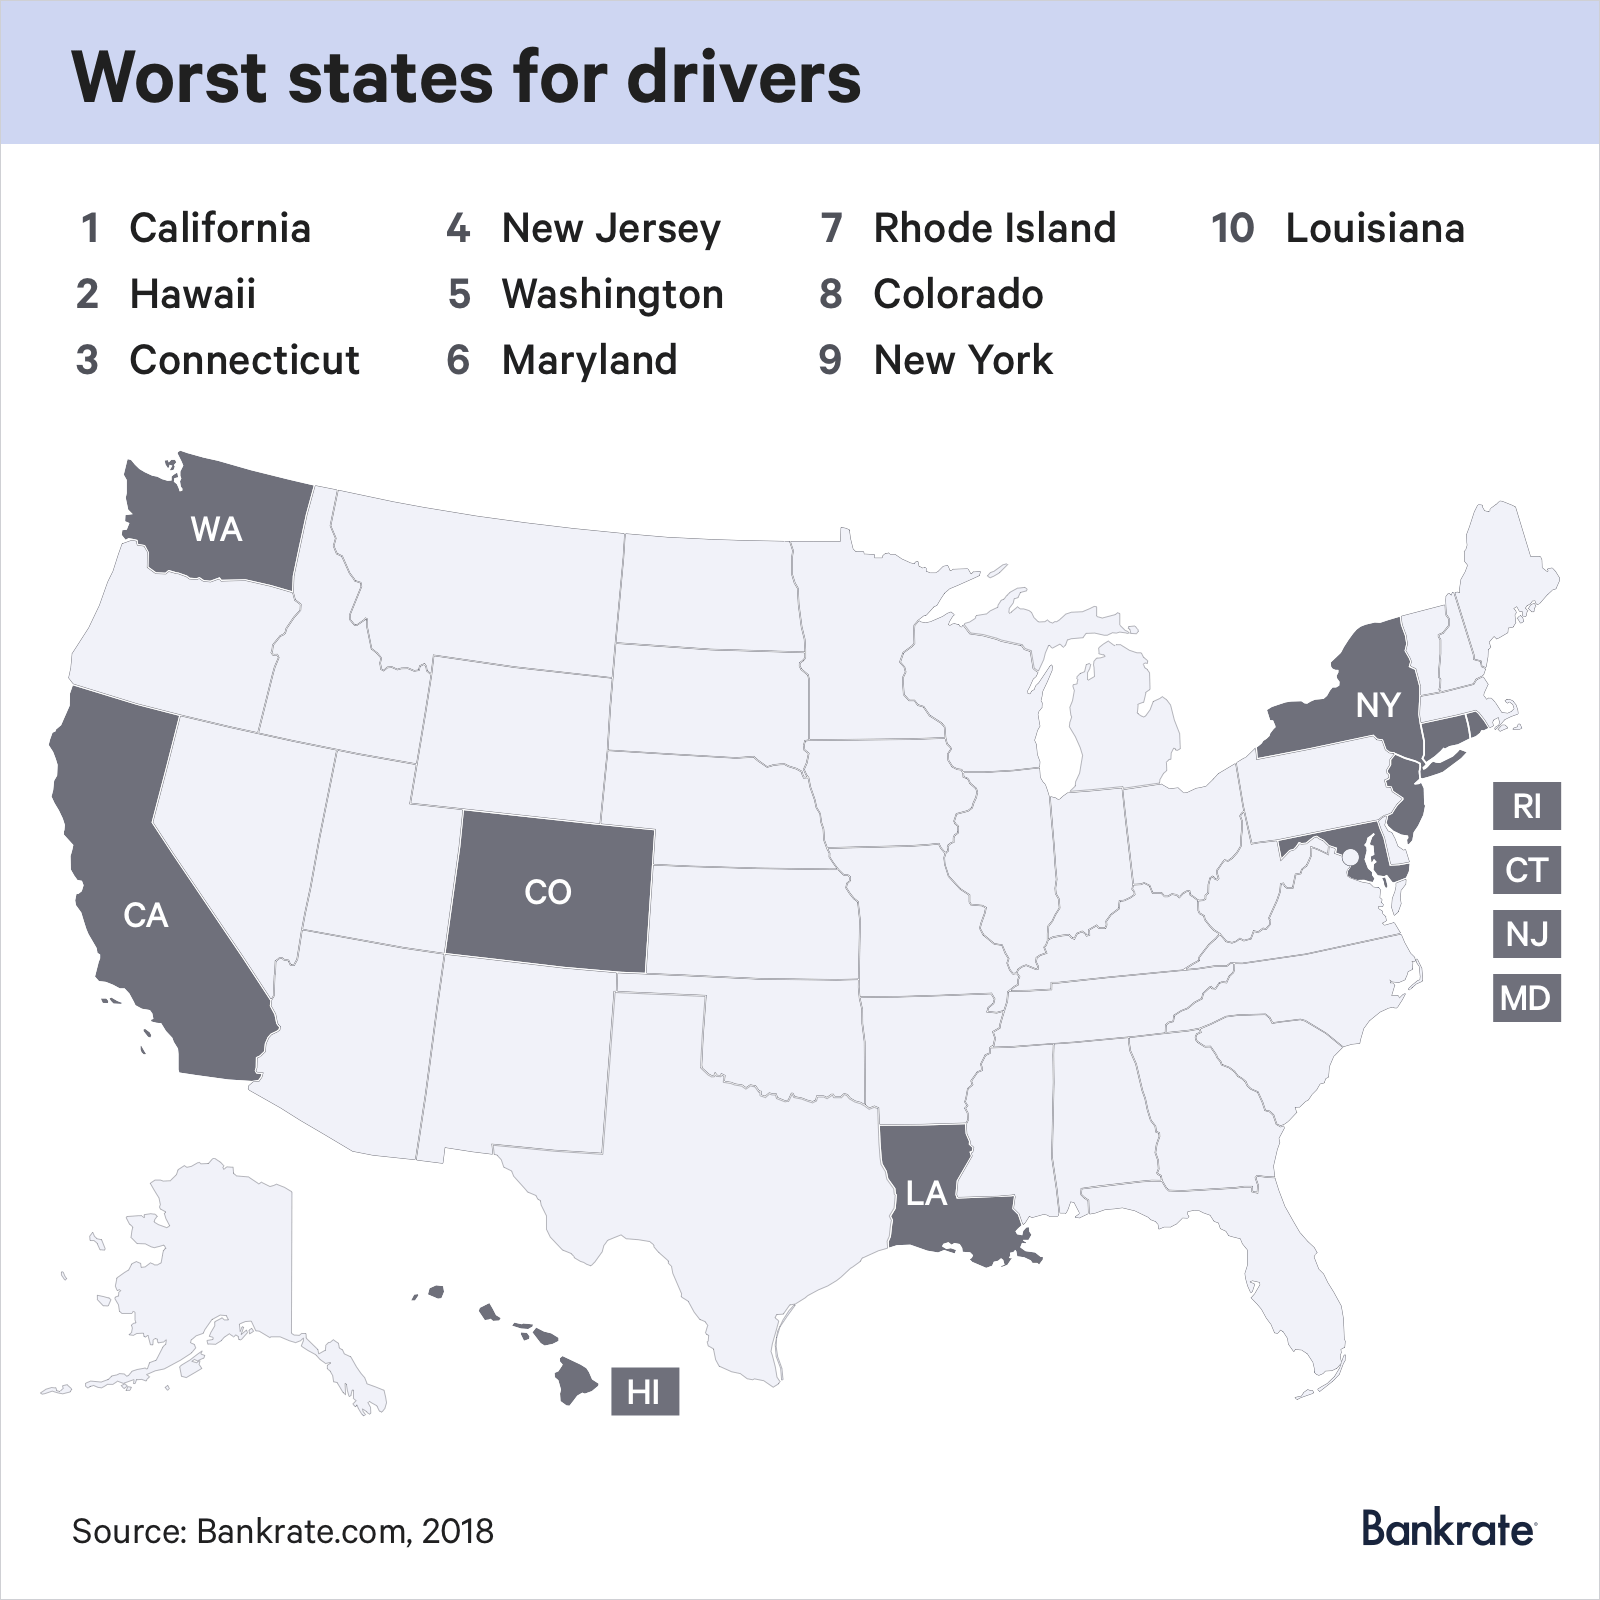 The worst states for drivers are California, Hawaii, Connecticut, New Jersey, Washington, Maryland, Rhode Island, Colorado, New York and Louisiana